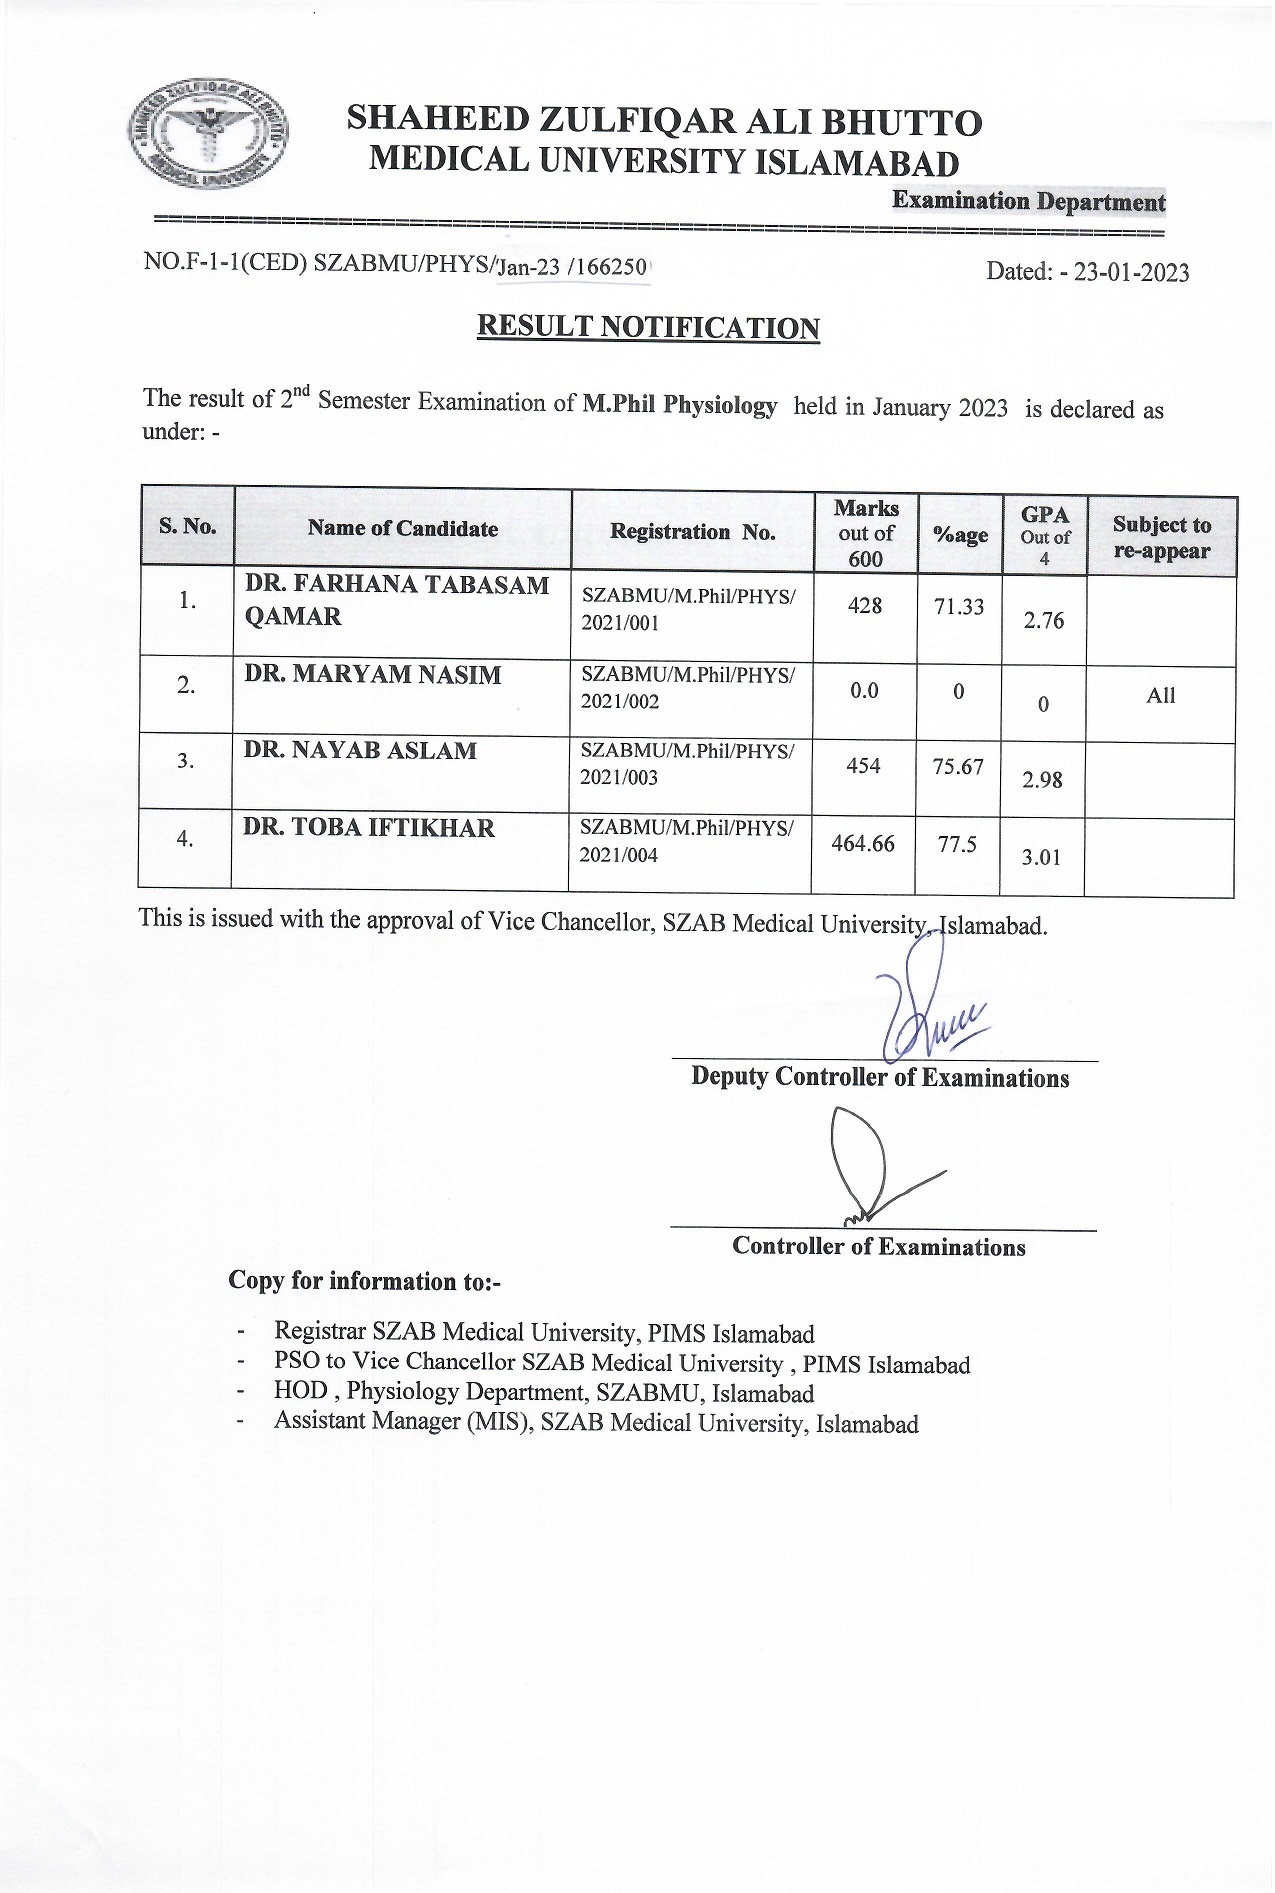 Result Notification of M.Phil. Physiology (2nd Semester) Examination 2023